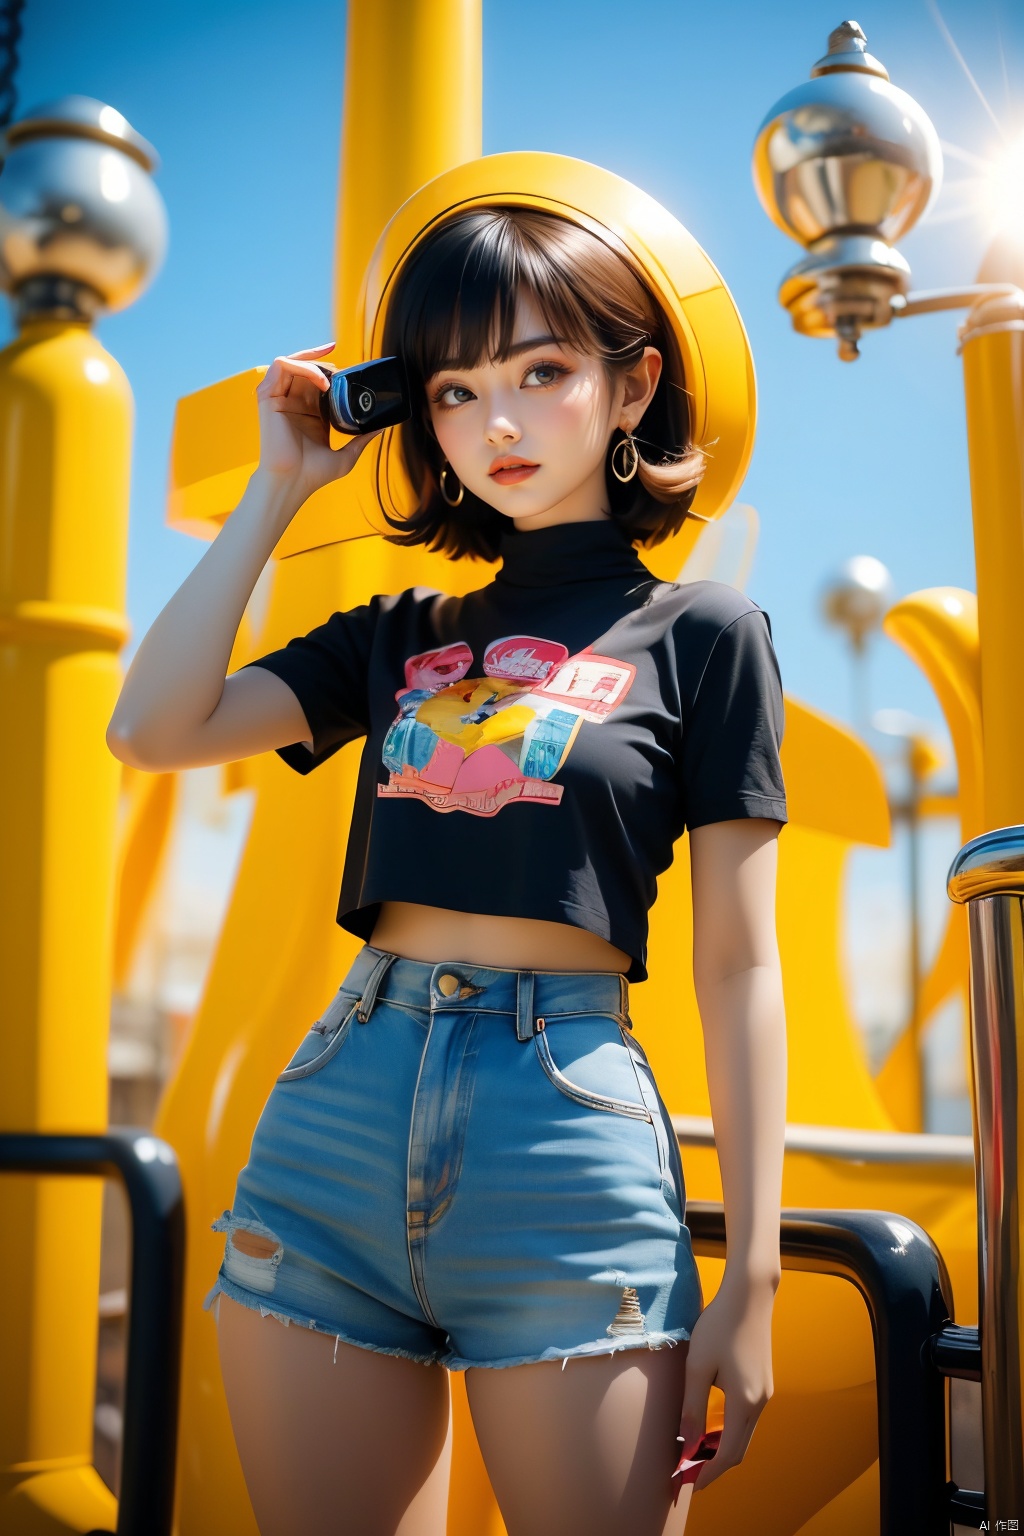 A fashionable young girl taking photos in the sunny weather, wearing trendy clothes, with a background of Memphis-style photography elements, featuring bright colors and artistic vibes. High-definition photo of a trendy girl in vibrant Memphis-style setting under the sun, full of lively colors and youthful energy., (\meng ze\)